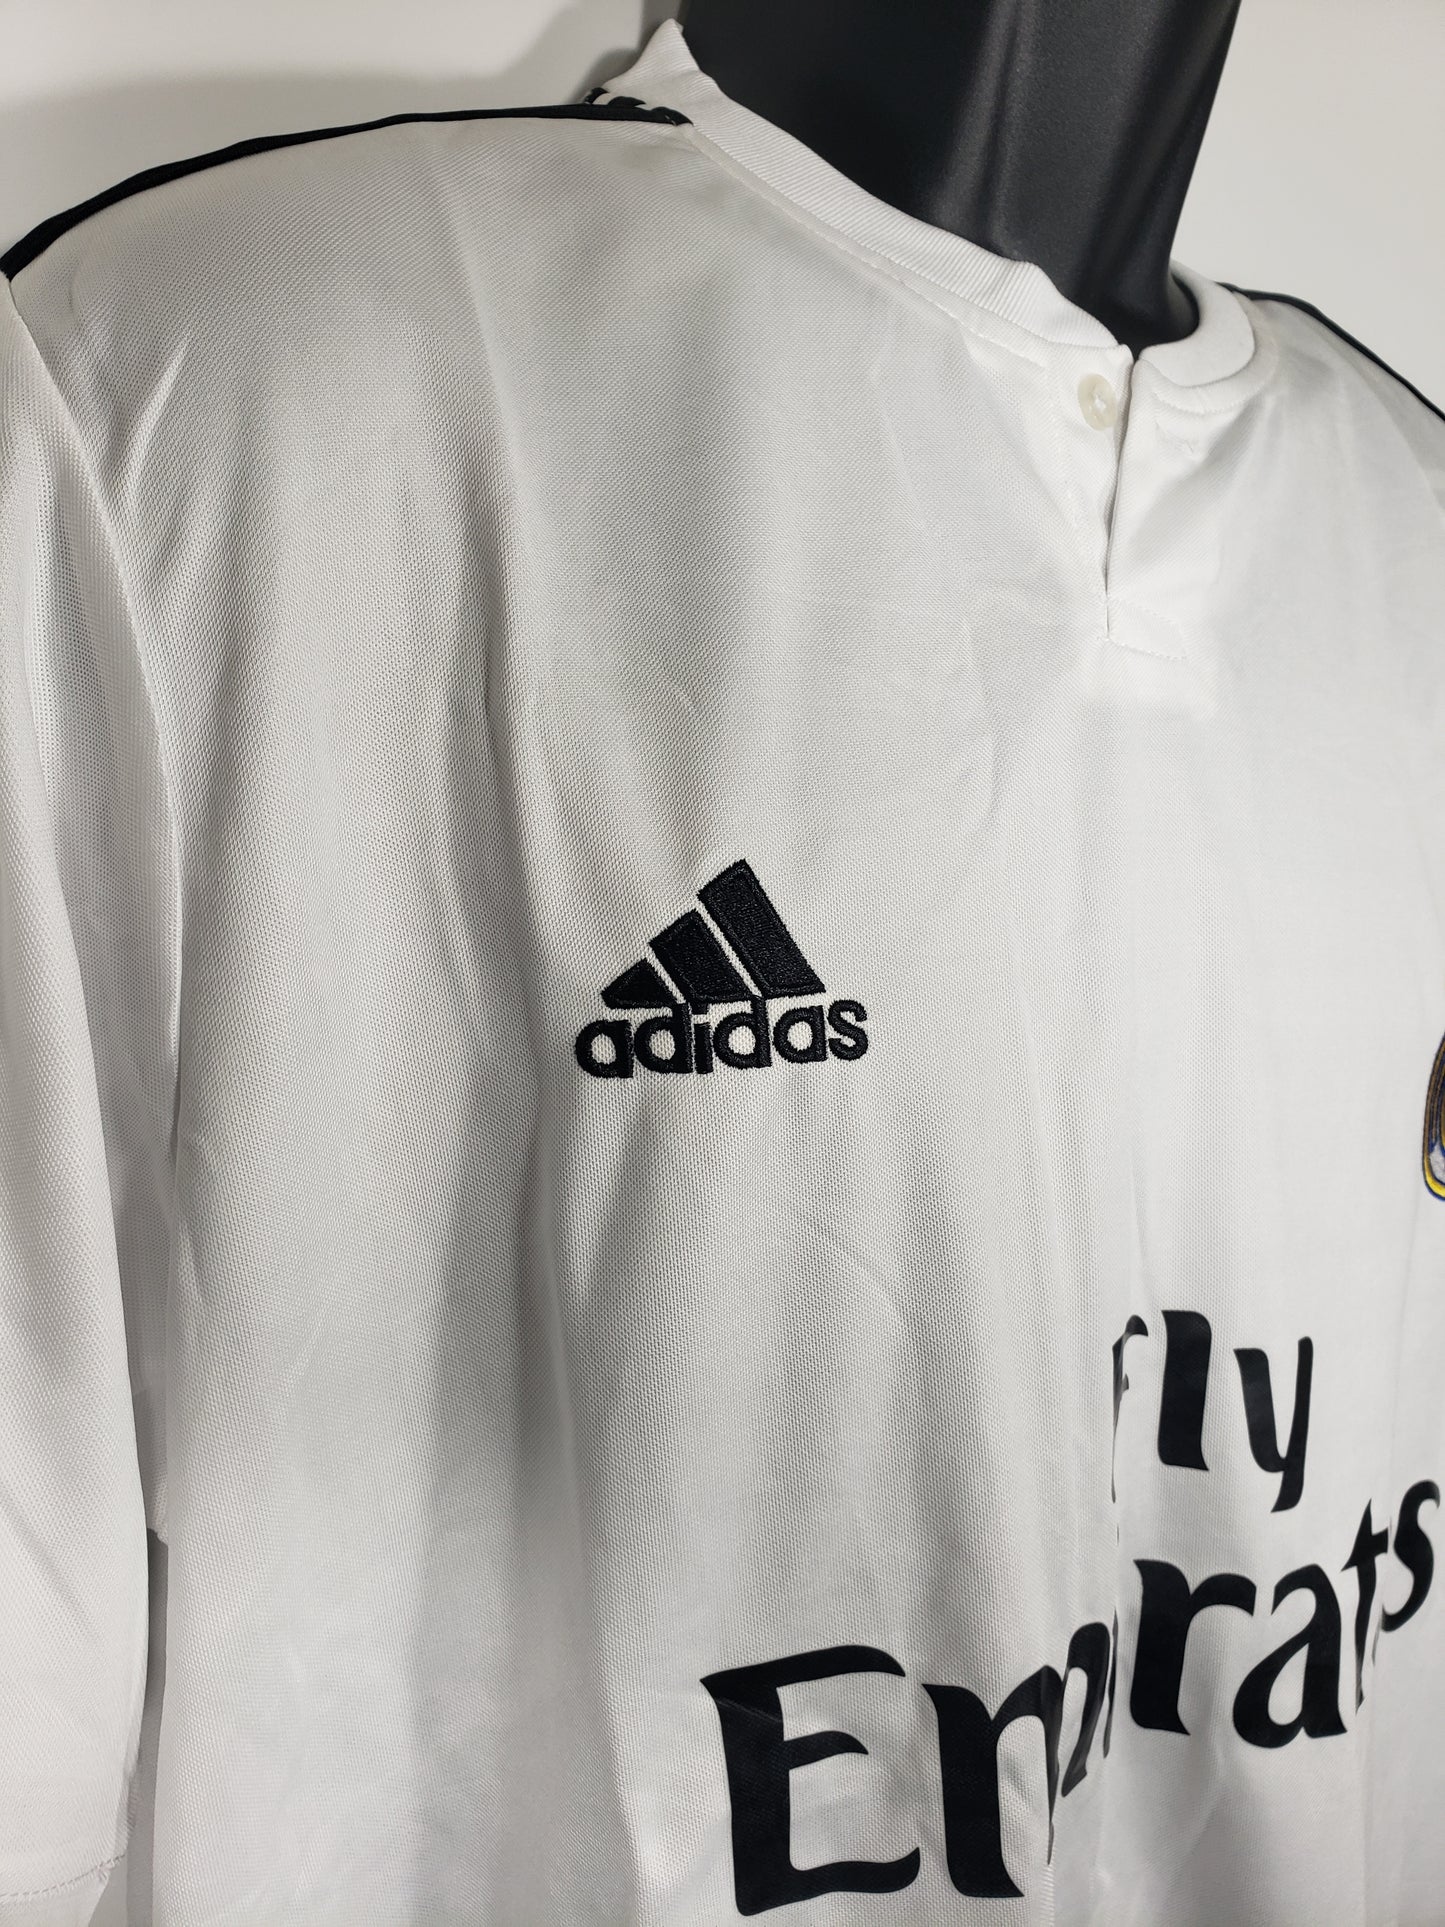 Real Madrid Replica Home Jersey